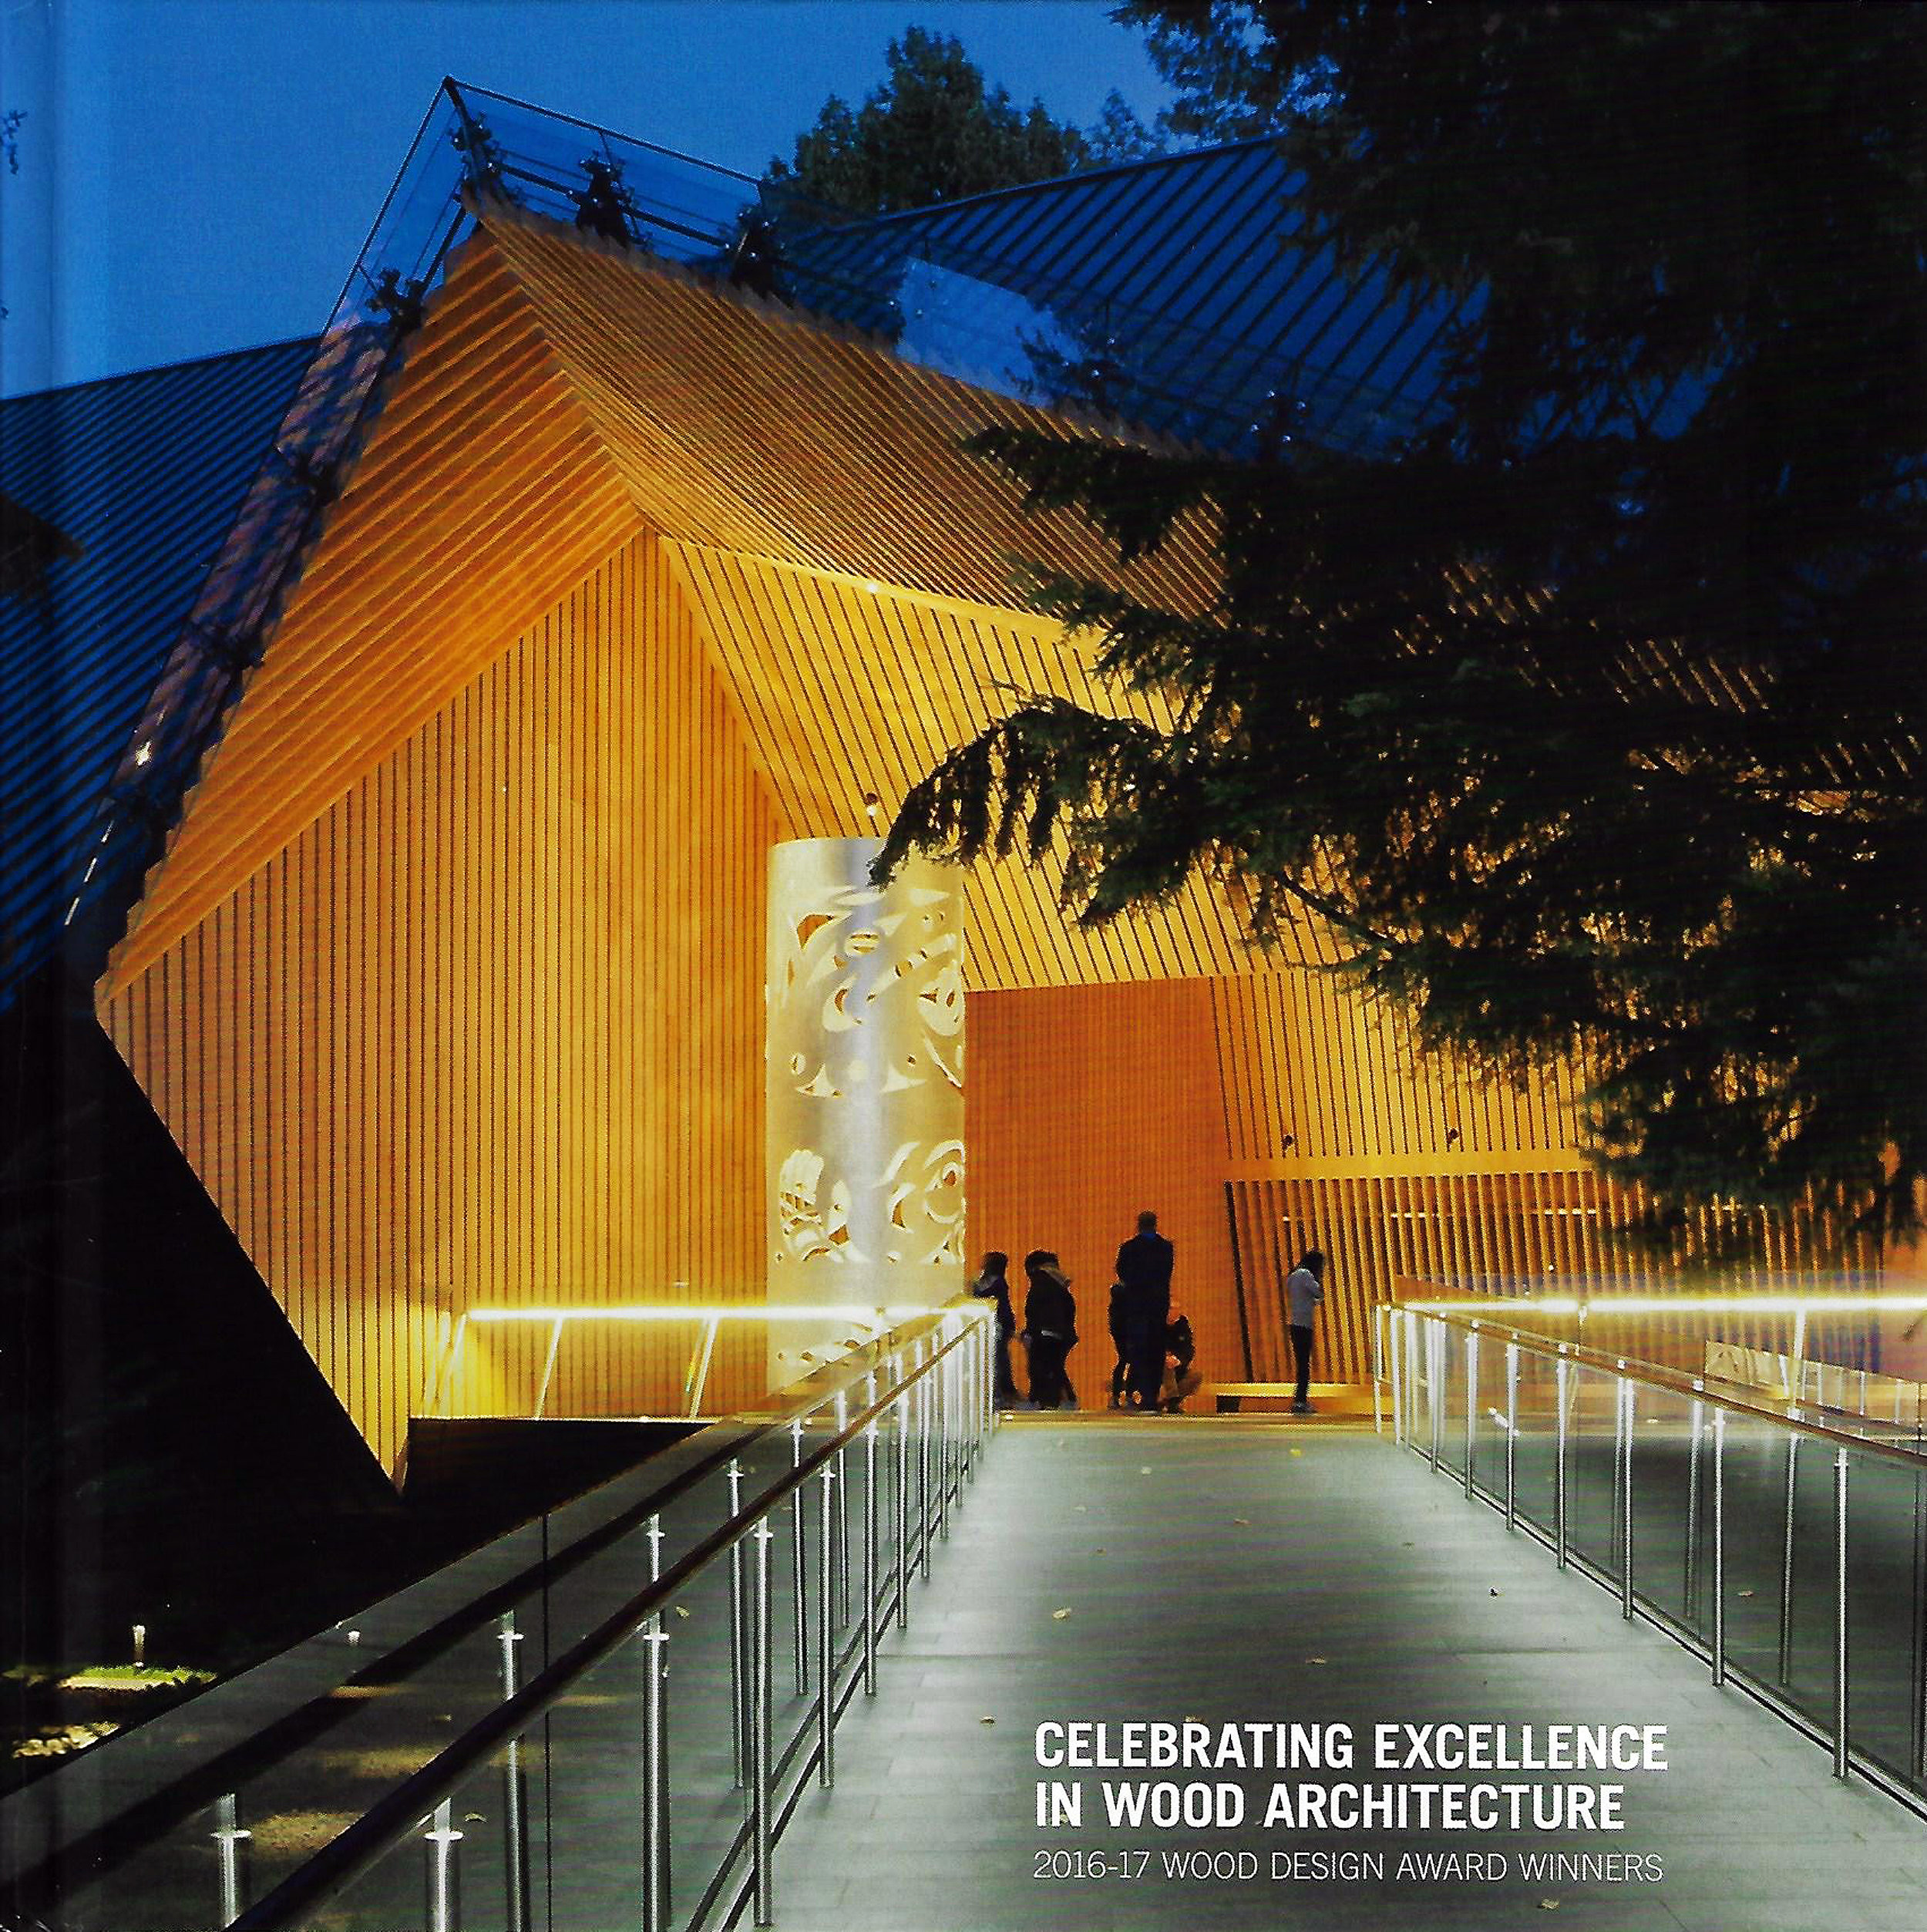 CELEBRATING EXCELLENCE IN WOOD ARCHITECTURE 2016-2017